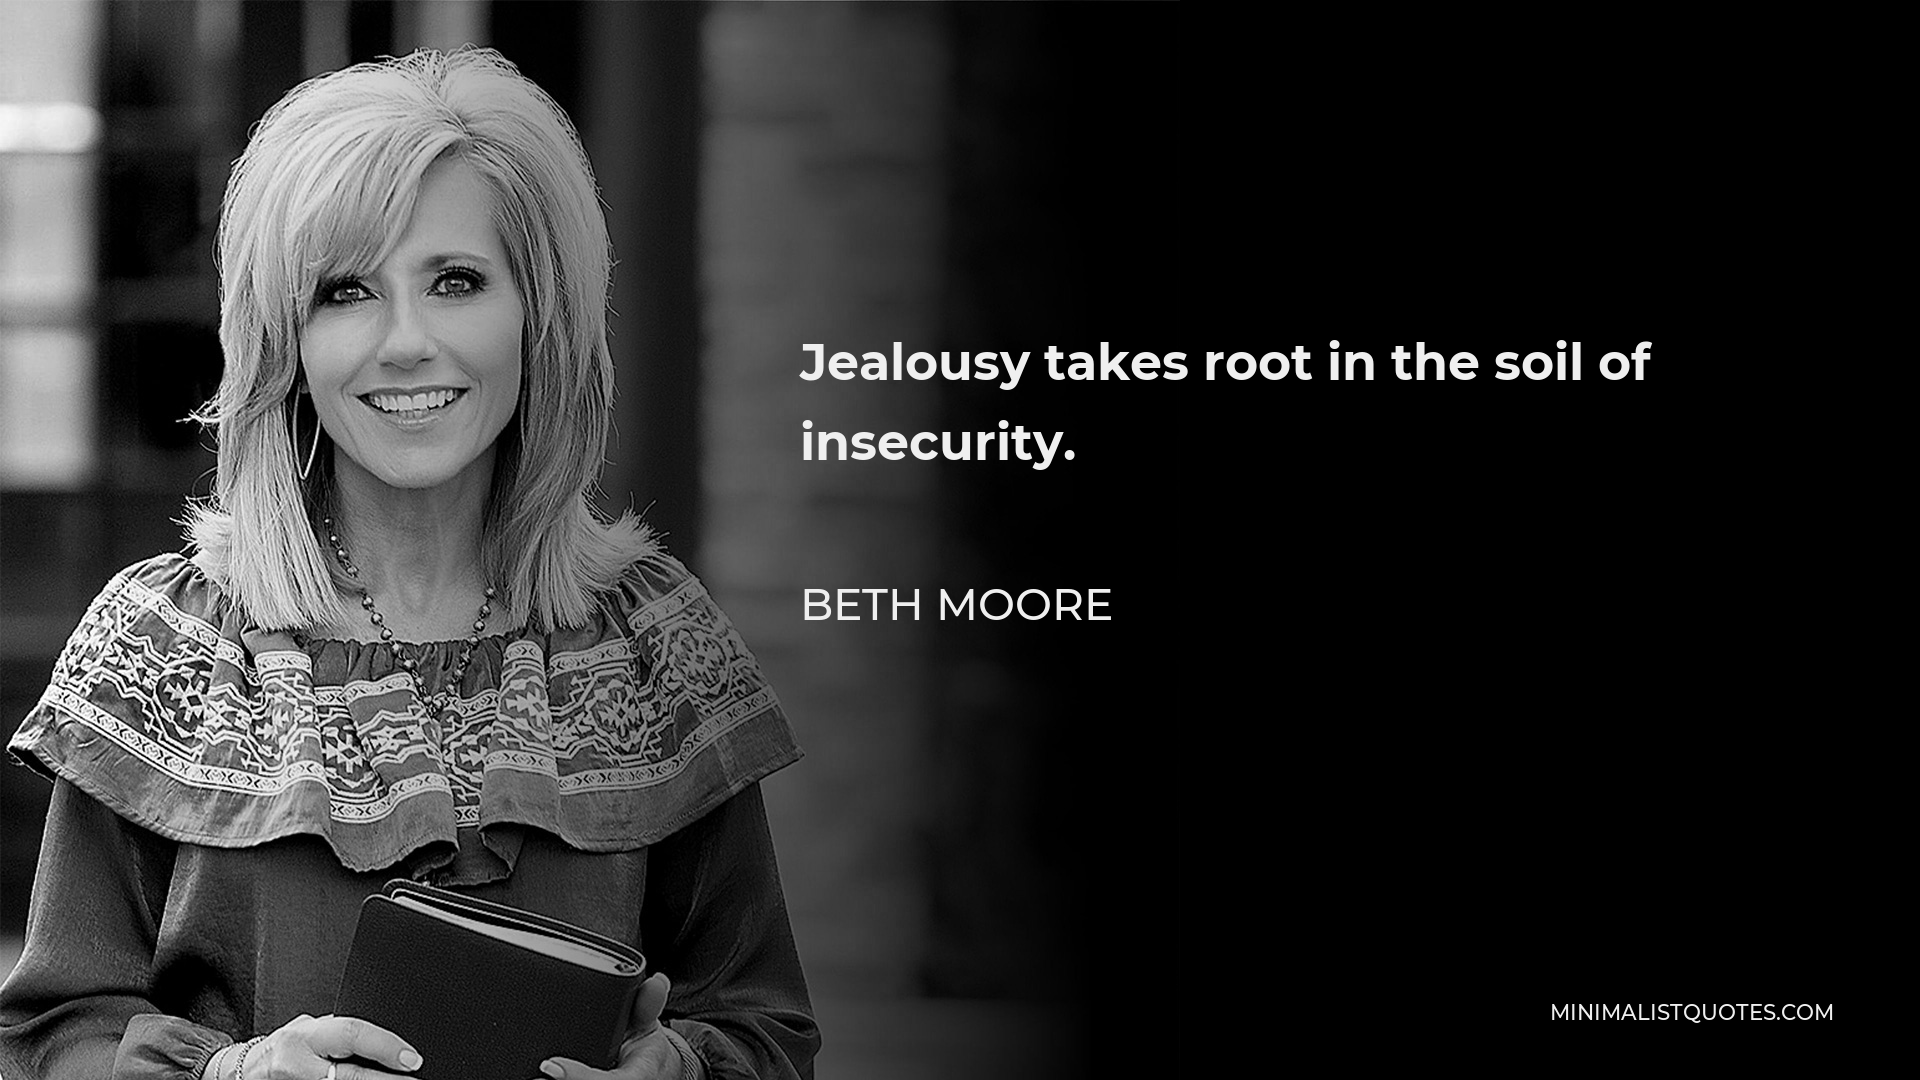 Beth Moore Quote - Jealousy takes root in the soil of insecurity.